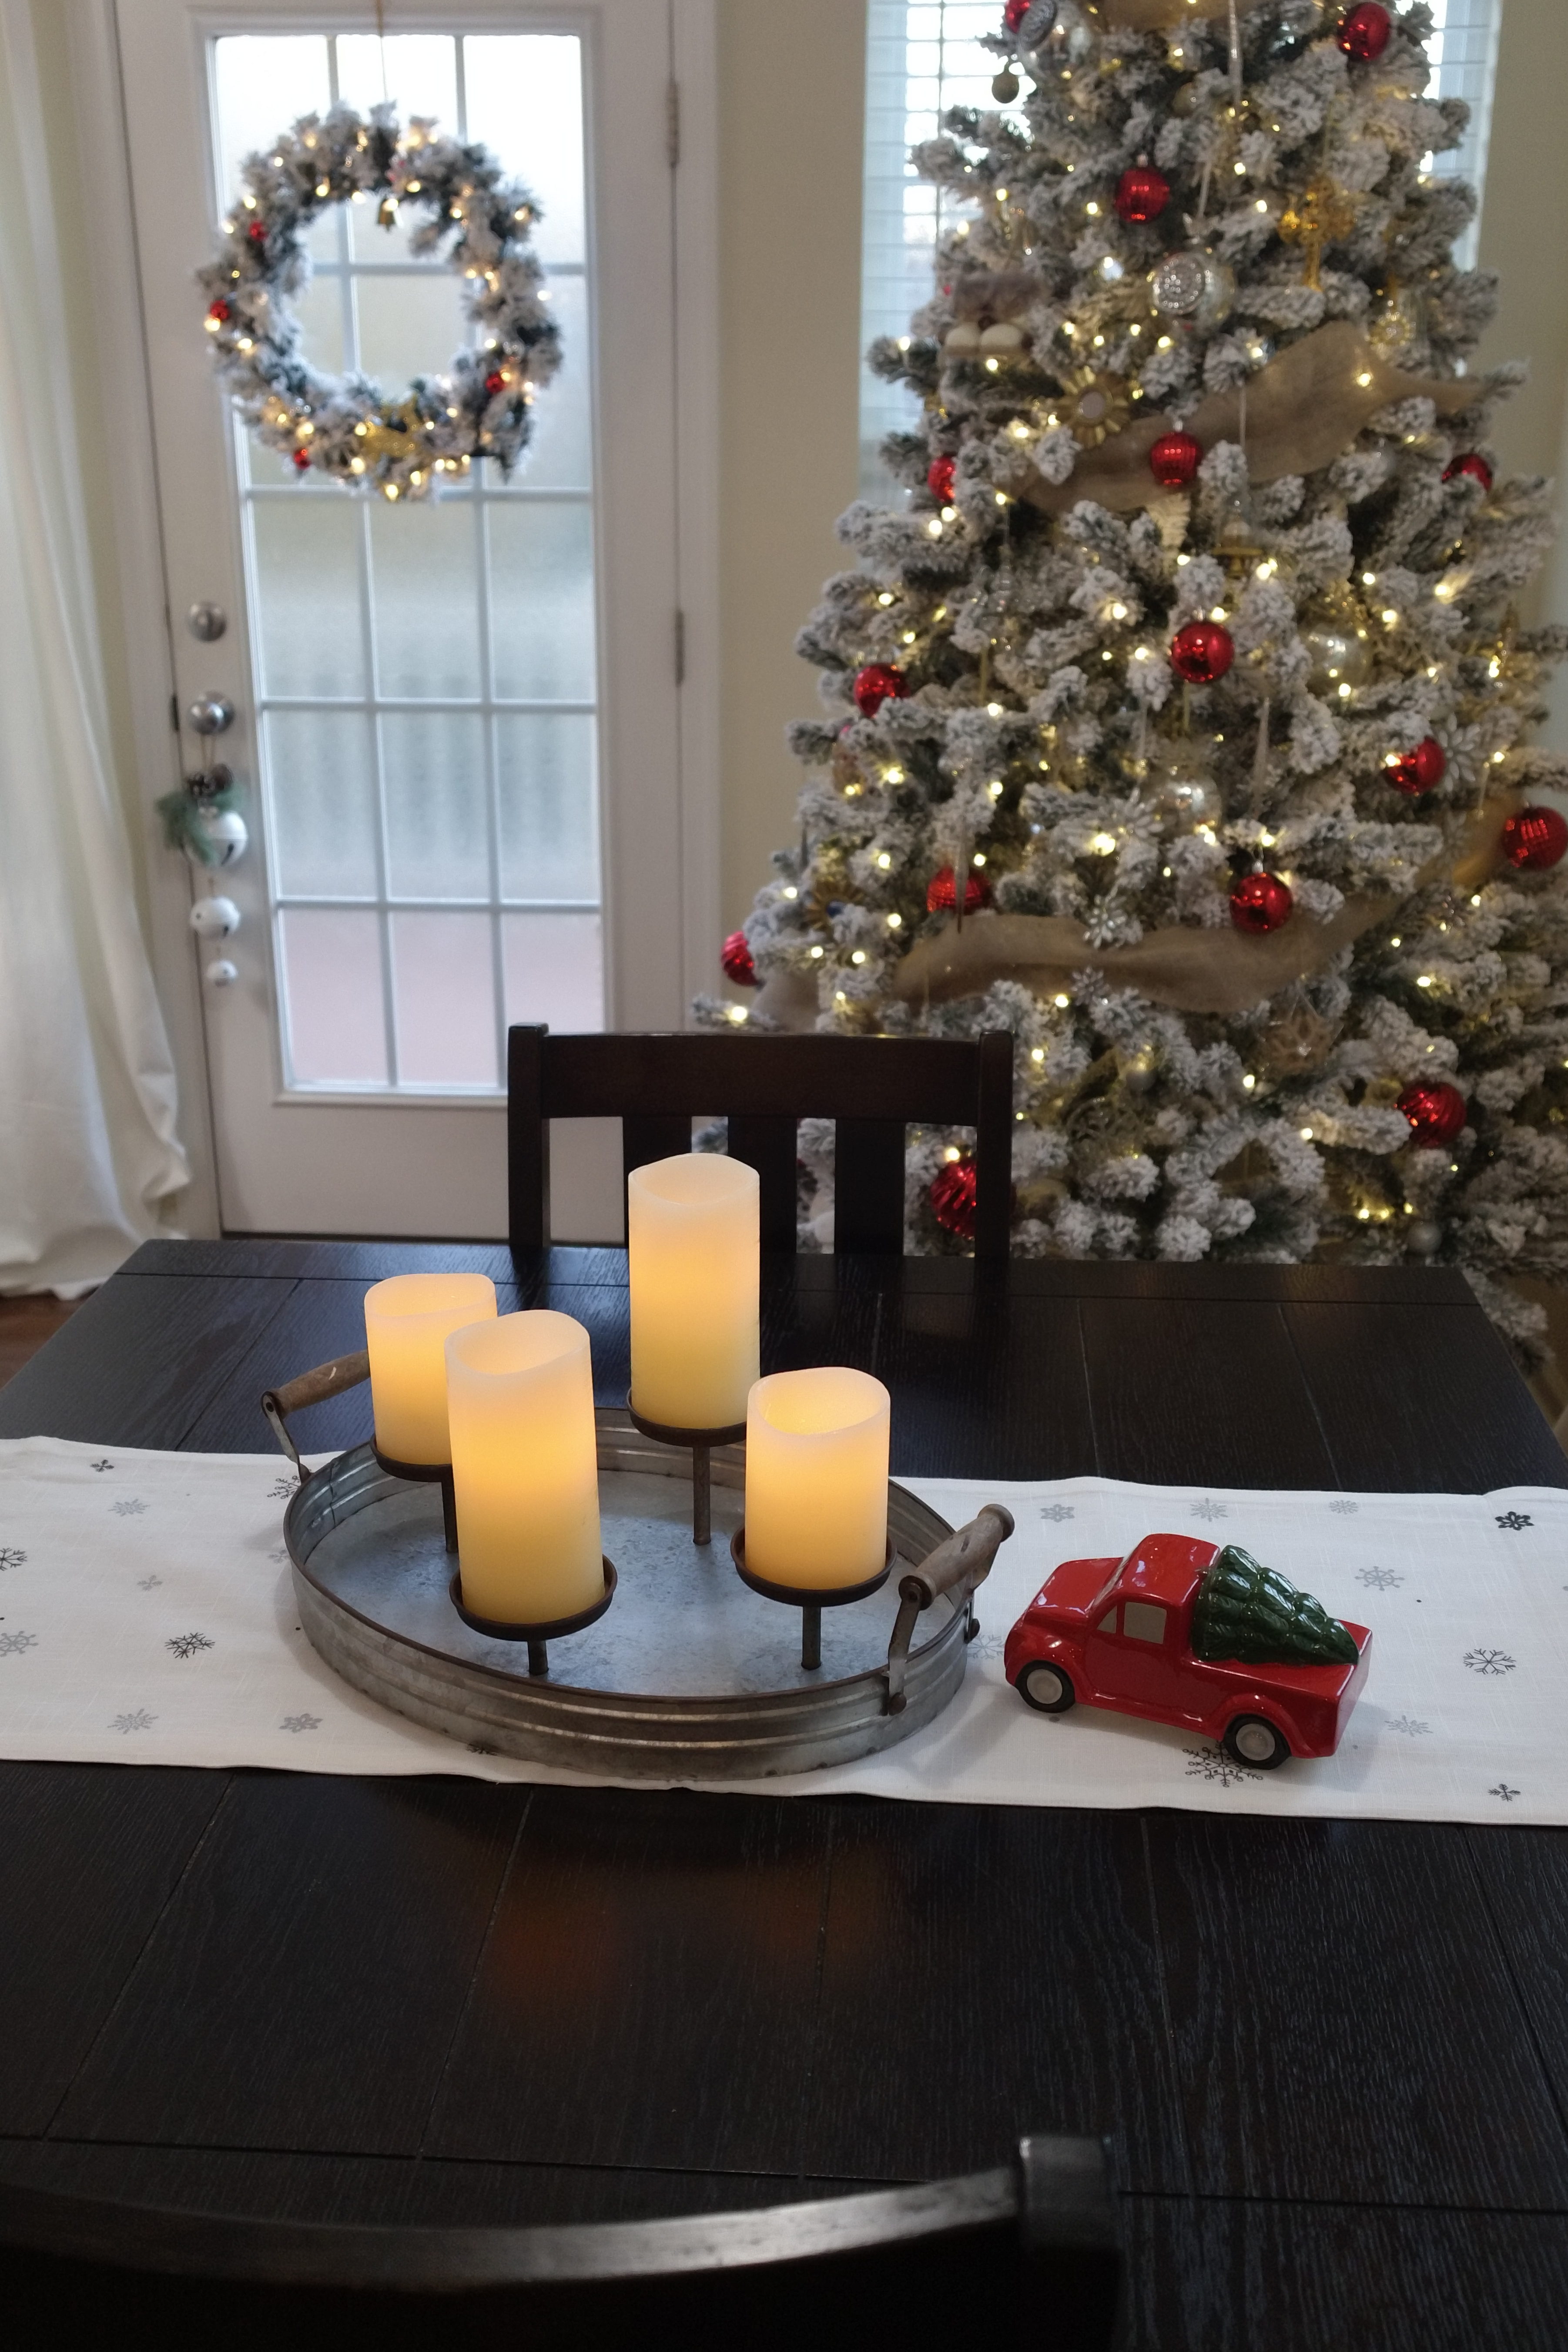 WAYFAIR Holiday decorating traditions